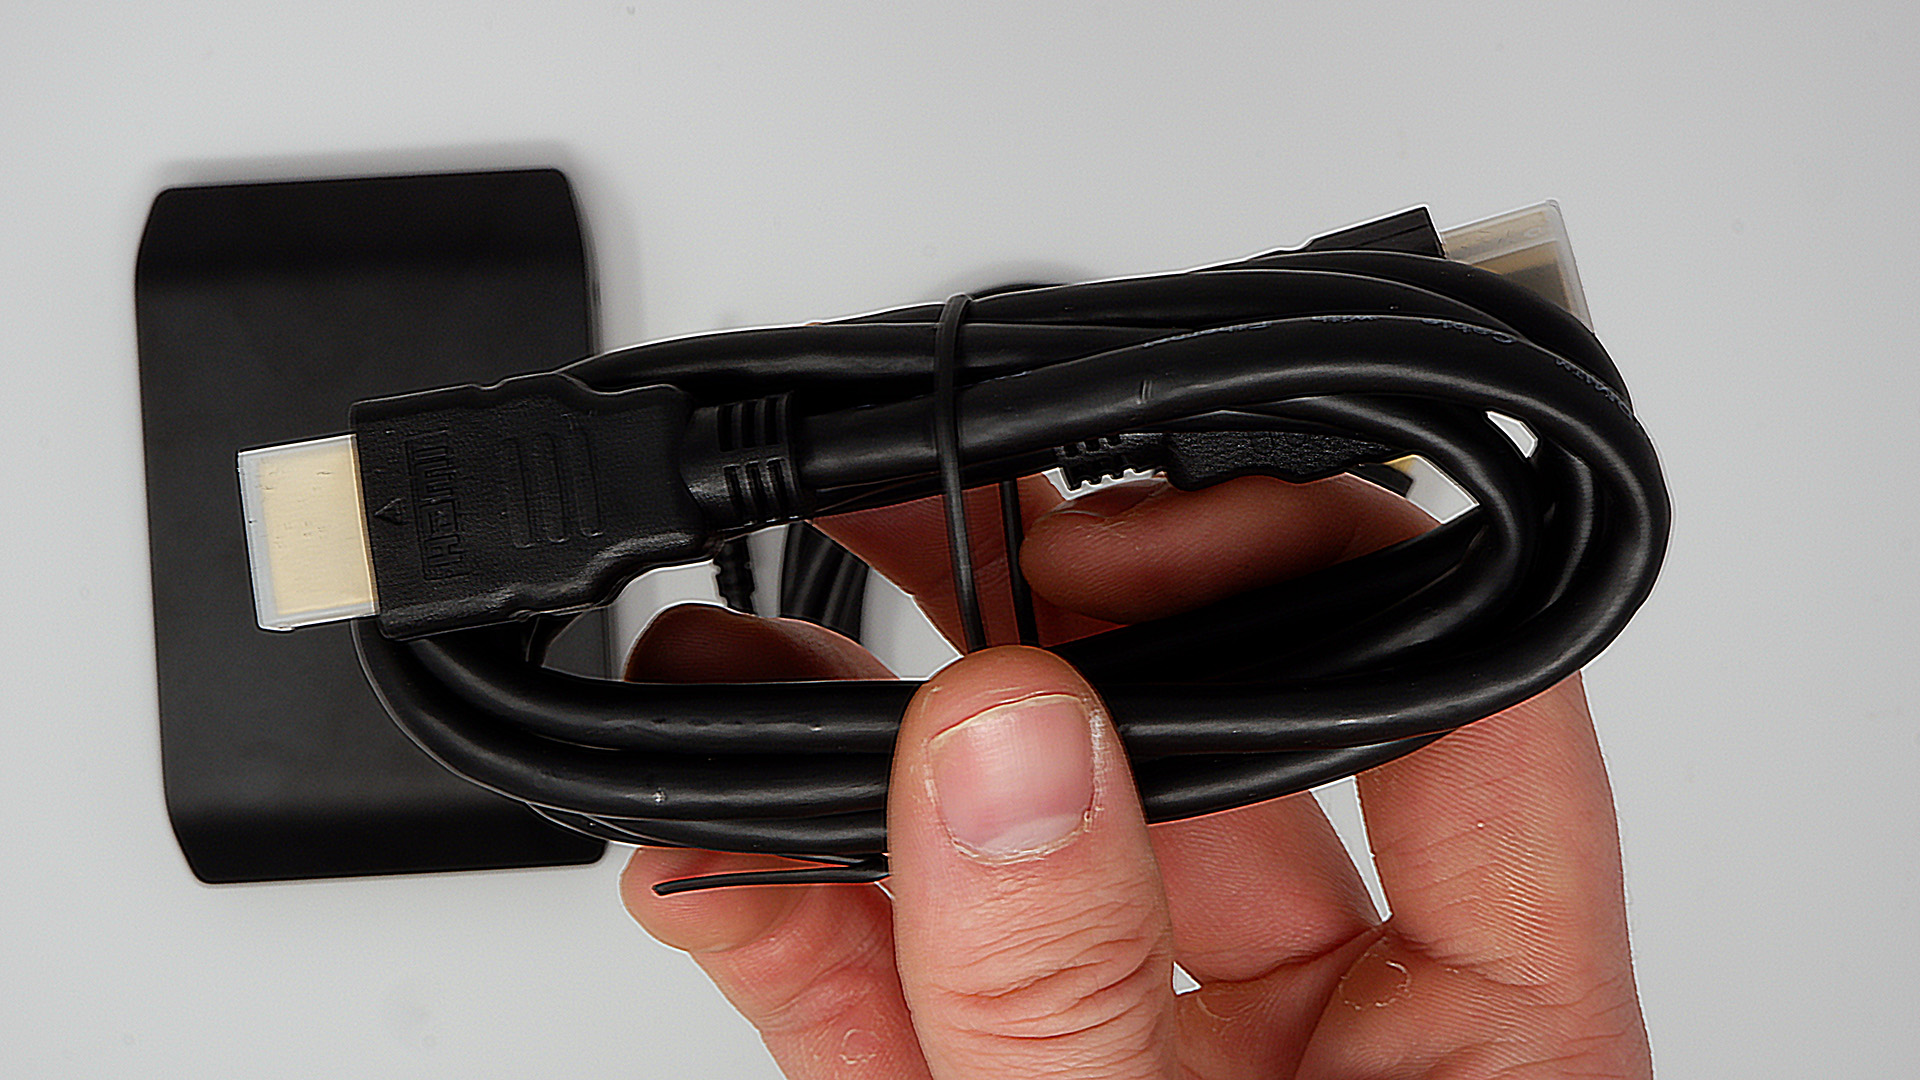 Elgato HD60 X capture card with box and cables.